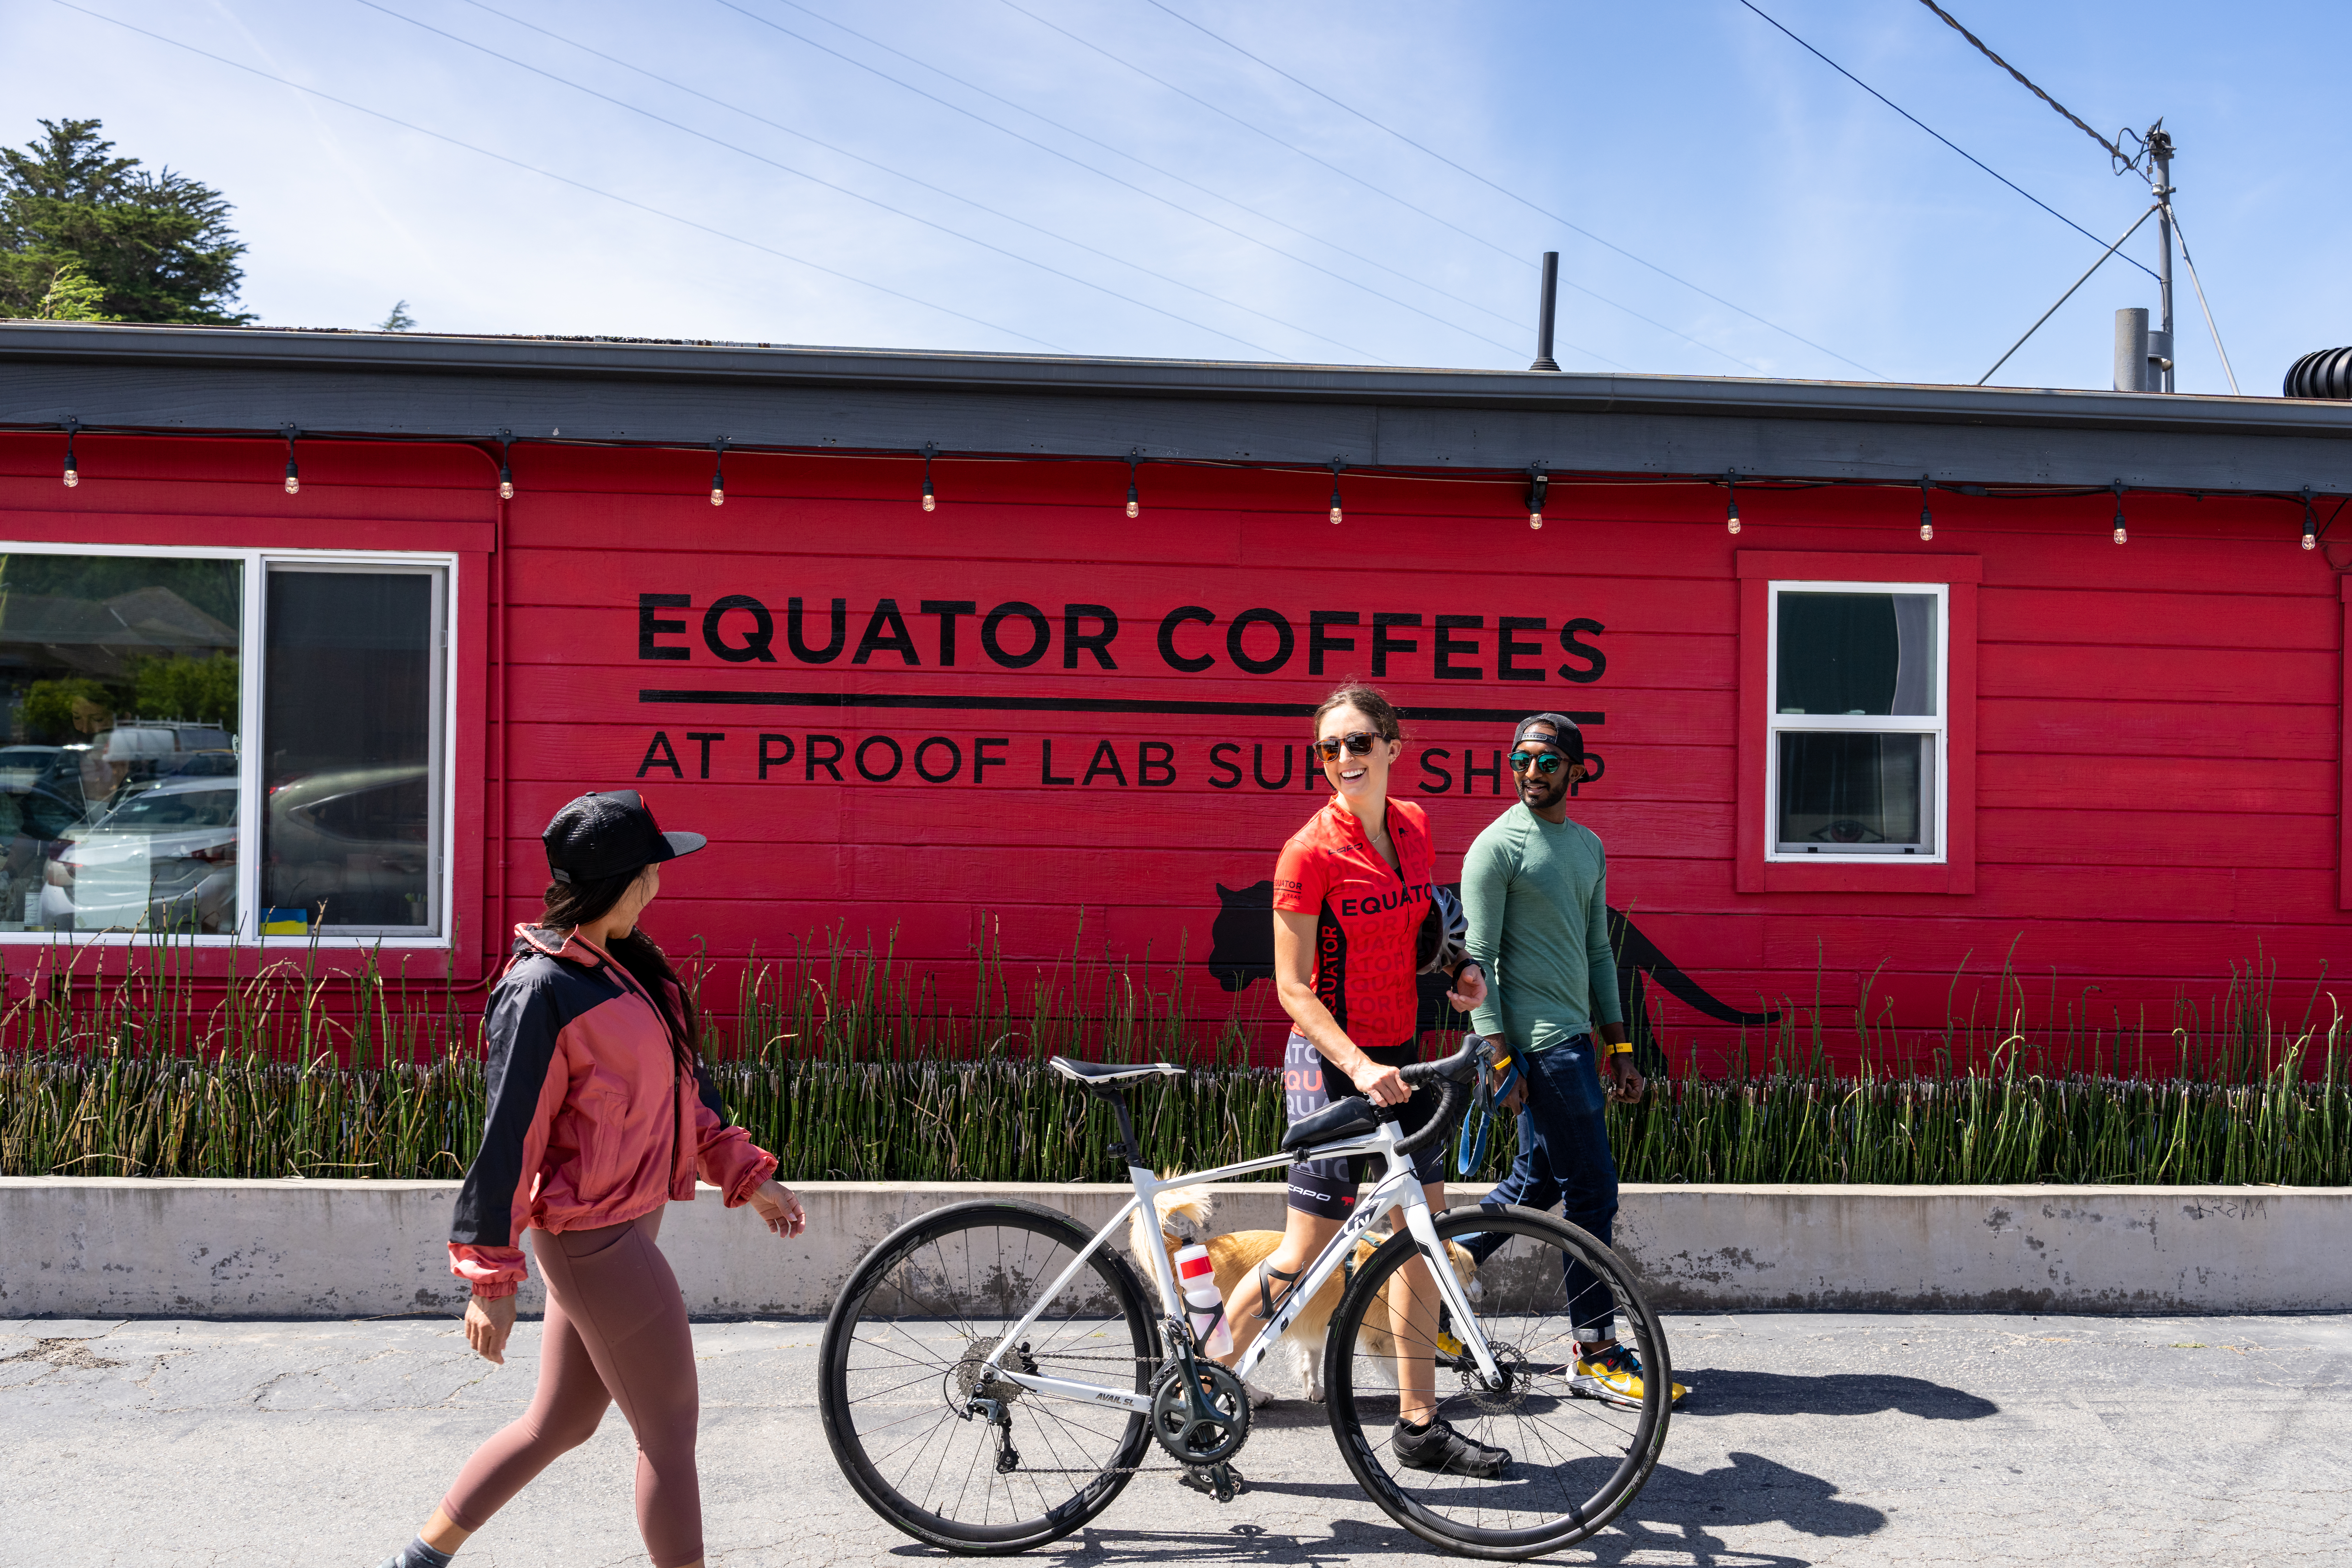 202206 Equator Coffees Endless Summer by Tony DiPasquale-02593